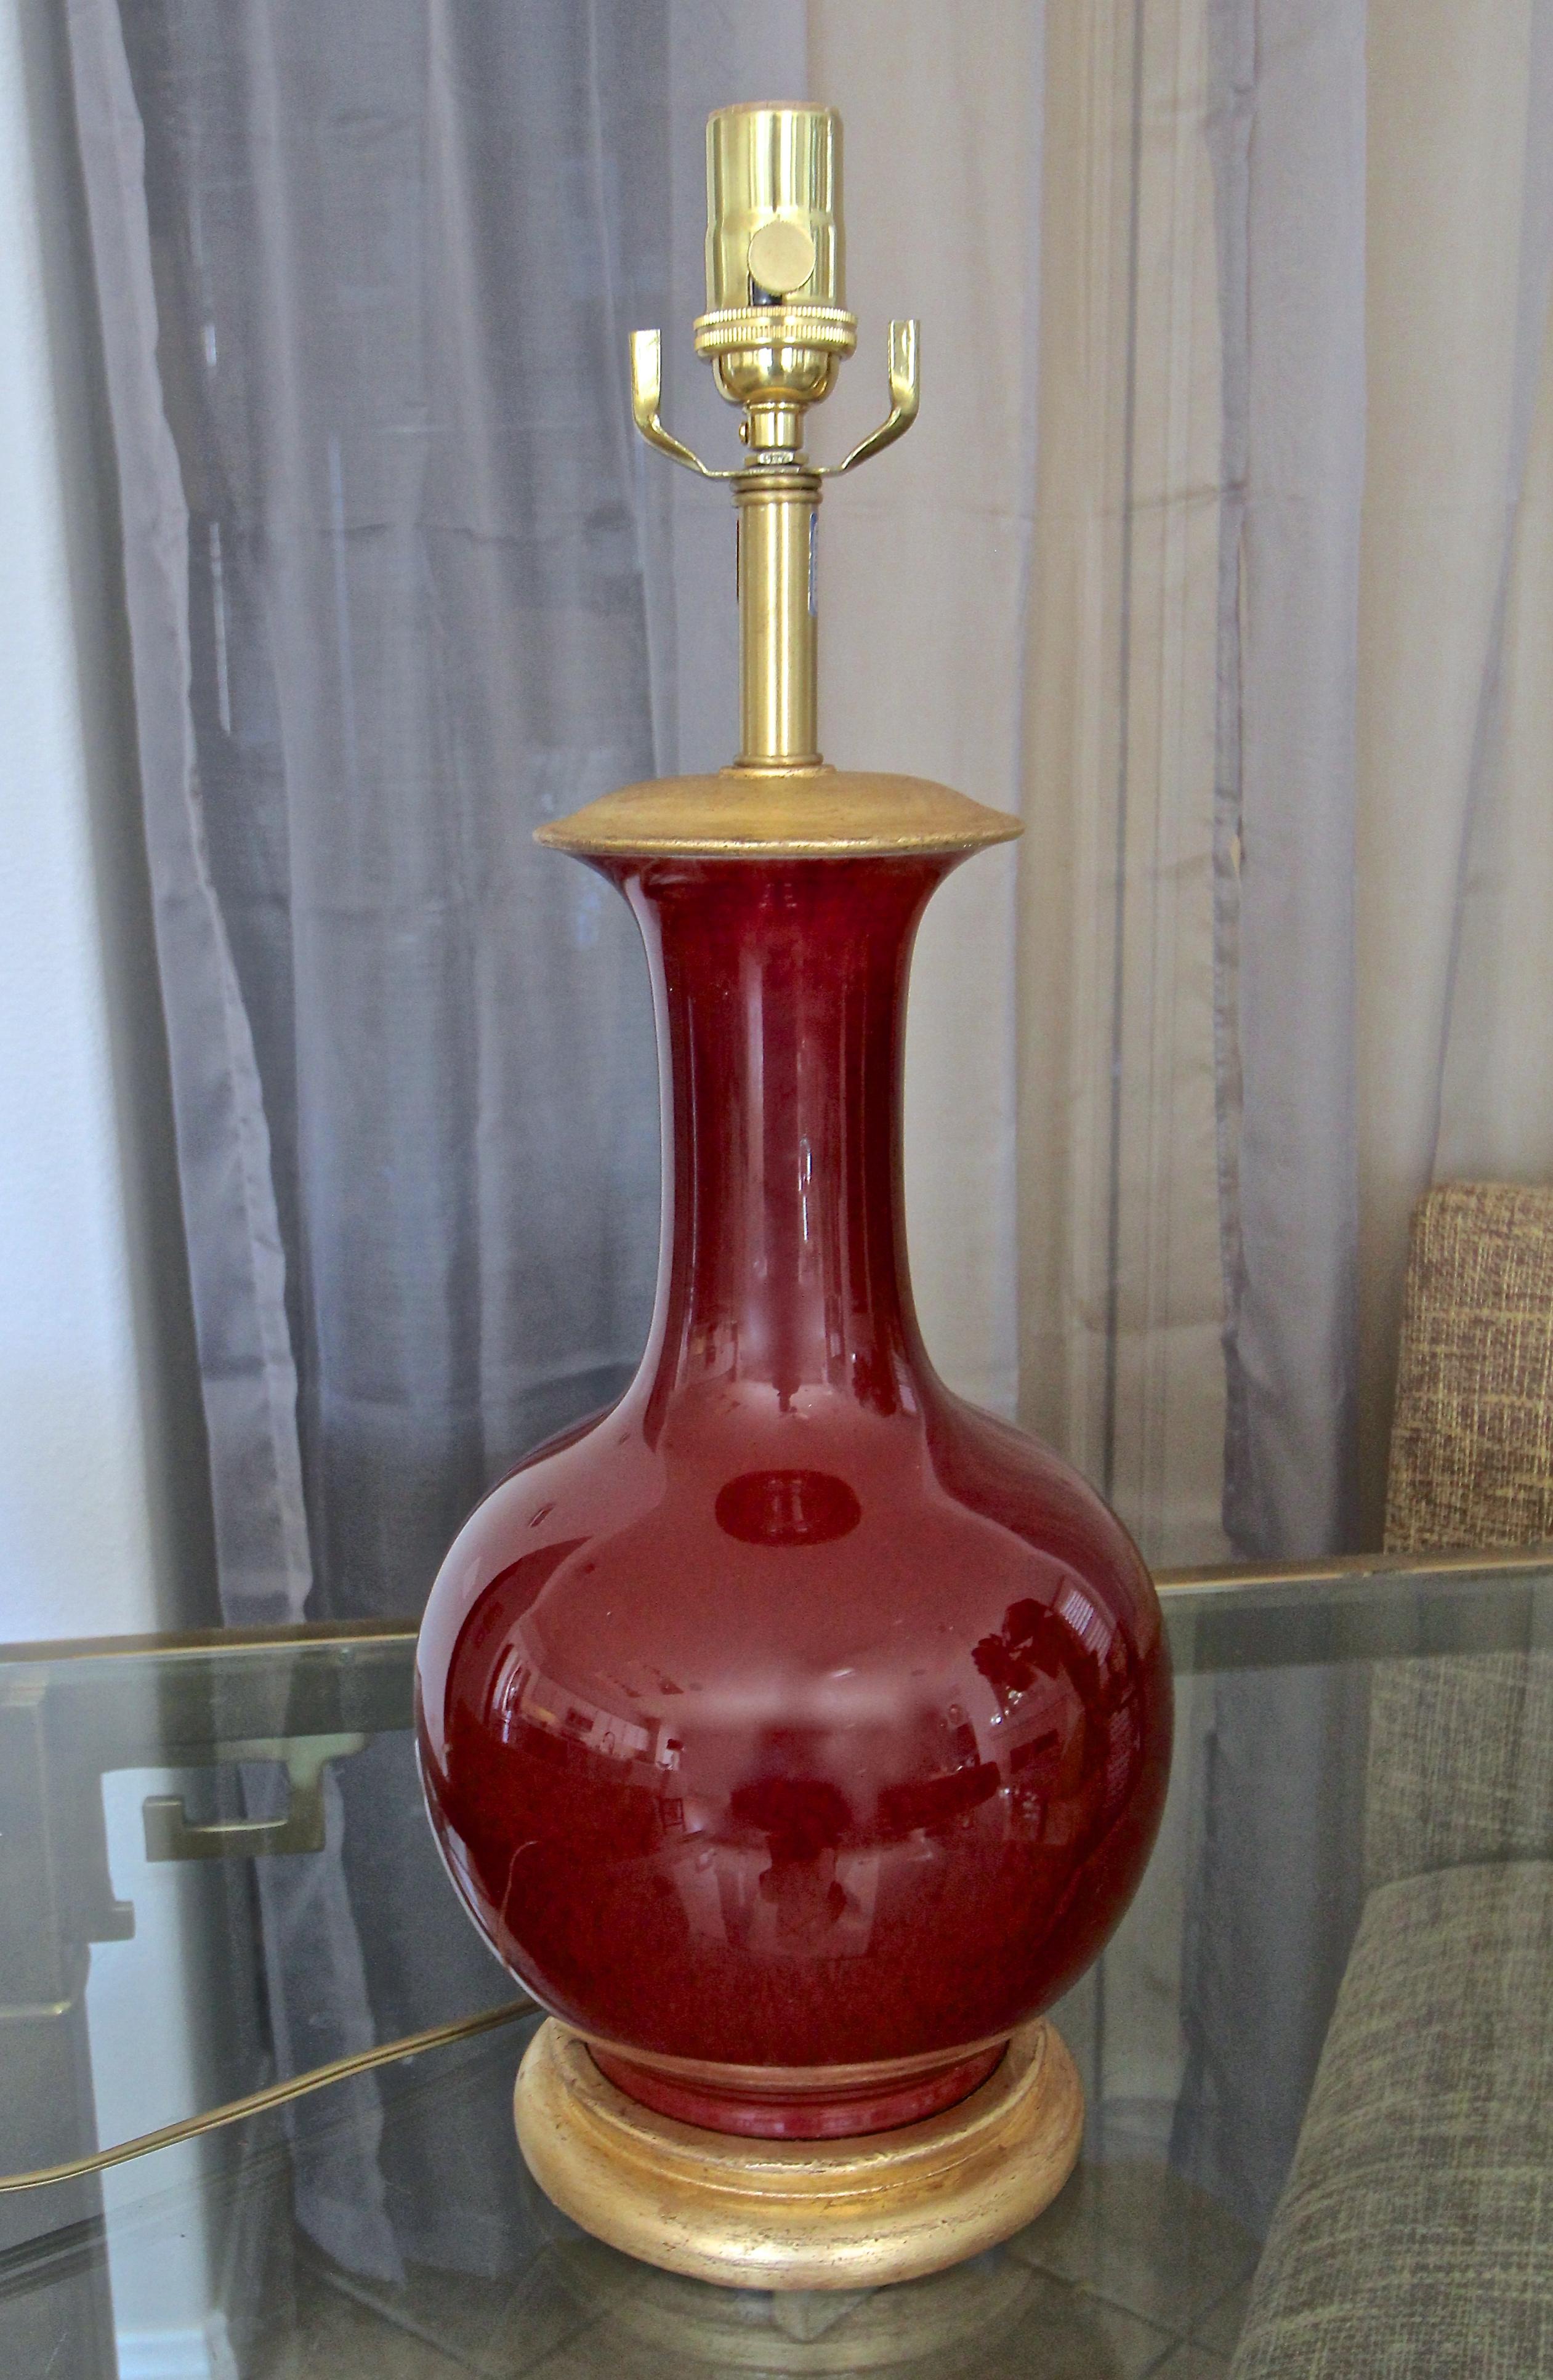 Chinese Asian Sang de Boeuf oxblood porcelain vase mounted on gilt turned wood lamp base by Marbro Lamp Company. The vase has a rich deep oxblood color. Rewired with new 3 way brass socket and cord.
Measures: Height top of socket 21